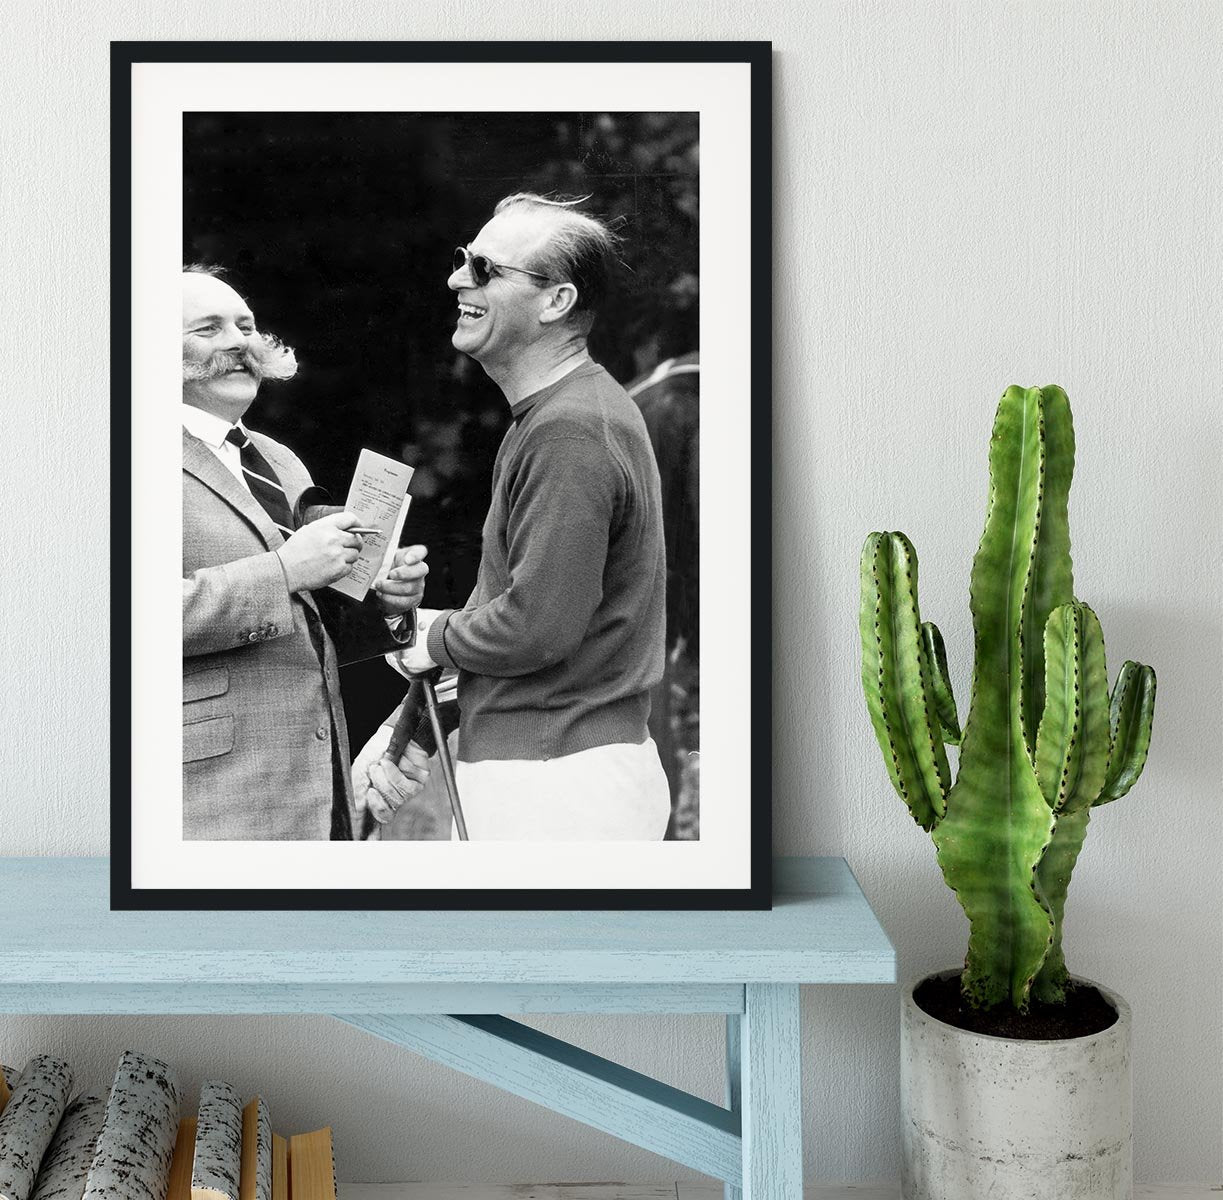 Prince Philip chatting with the comedian Jimmy Edwards Framed Print - Canvas Art Rocks - 1